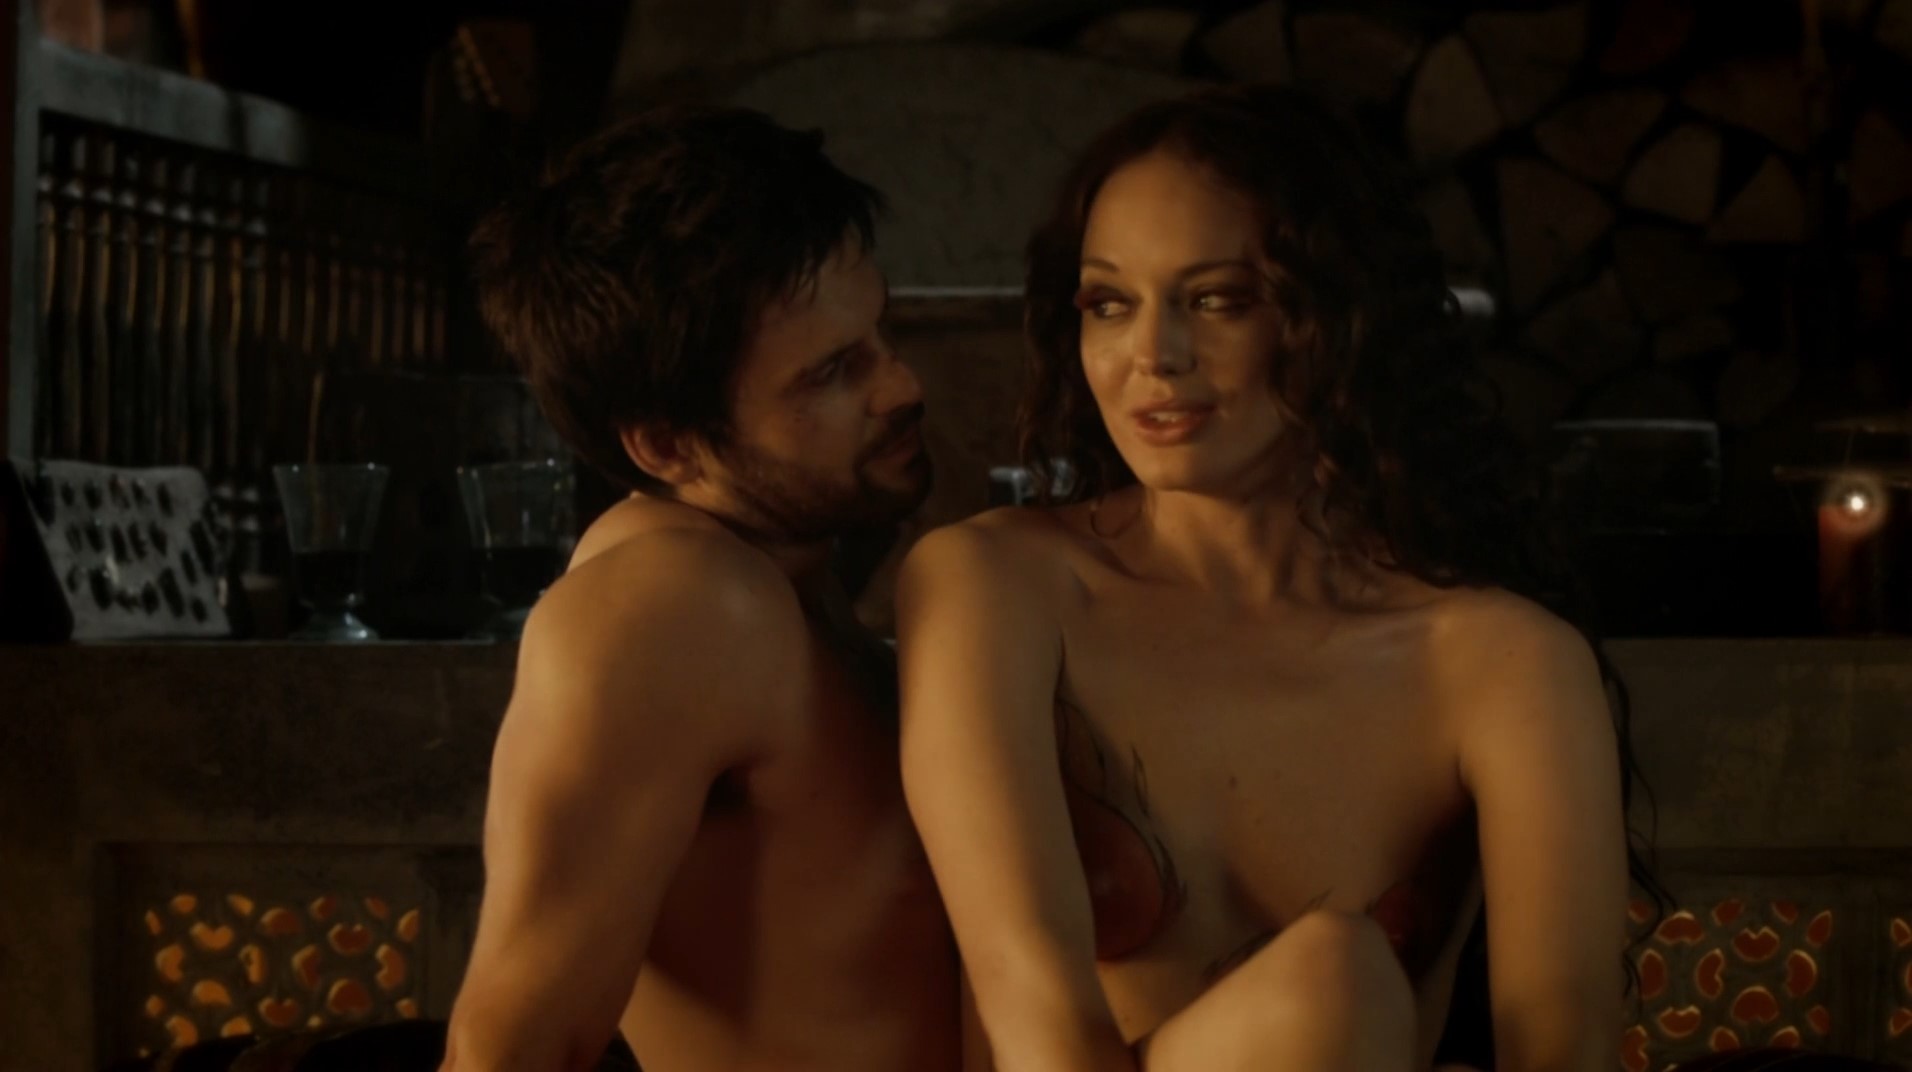 dmitry farber recommends laura haddock nude pic